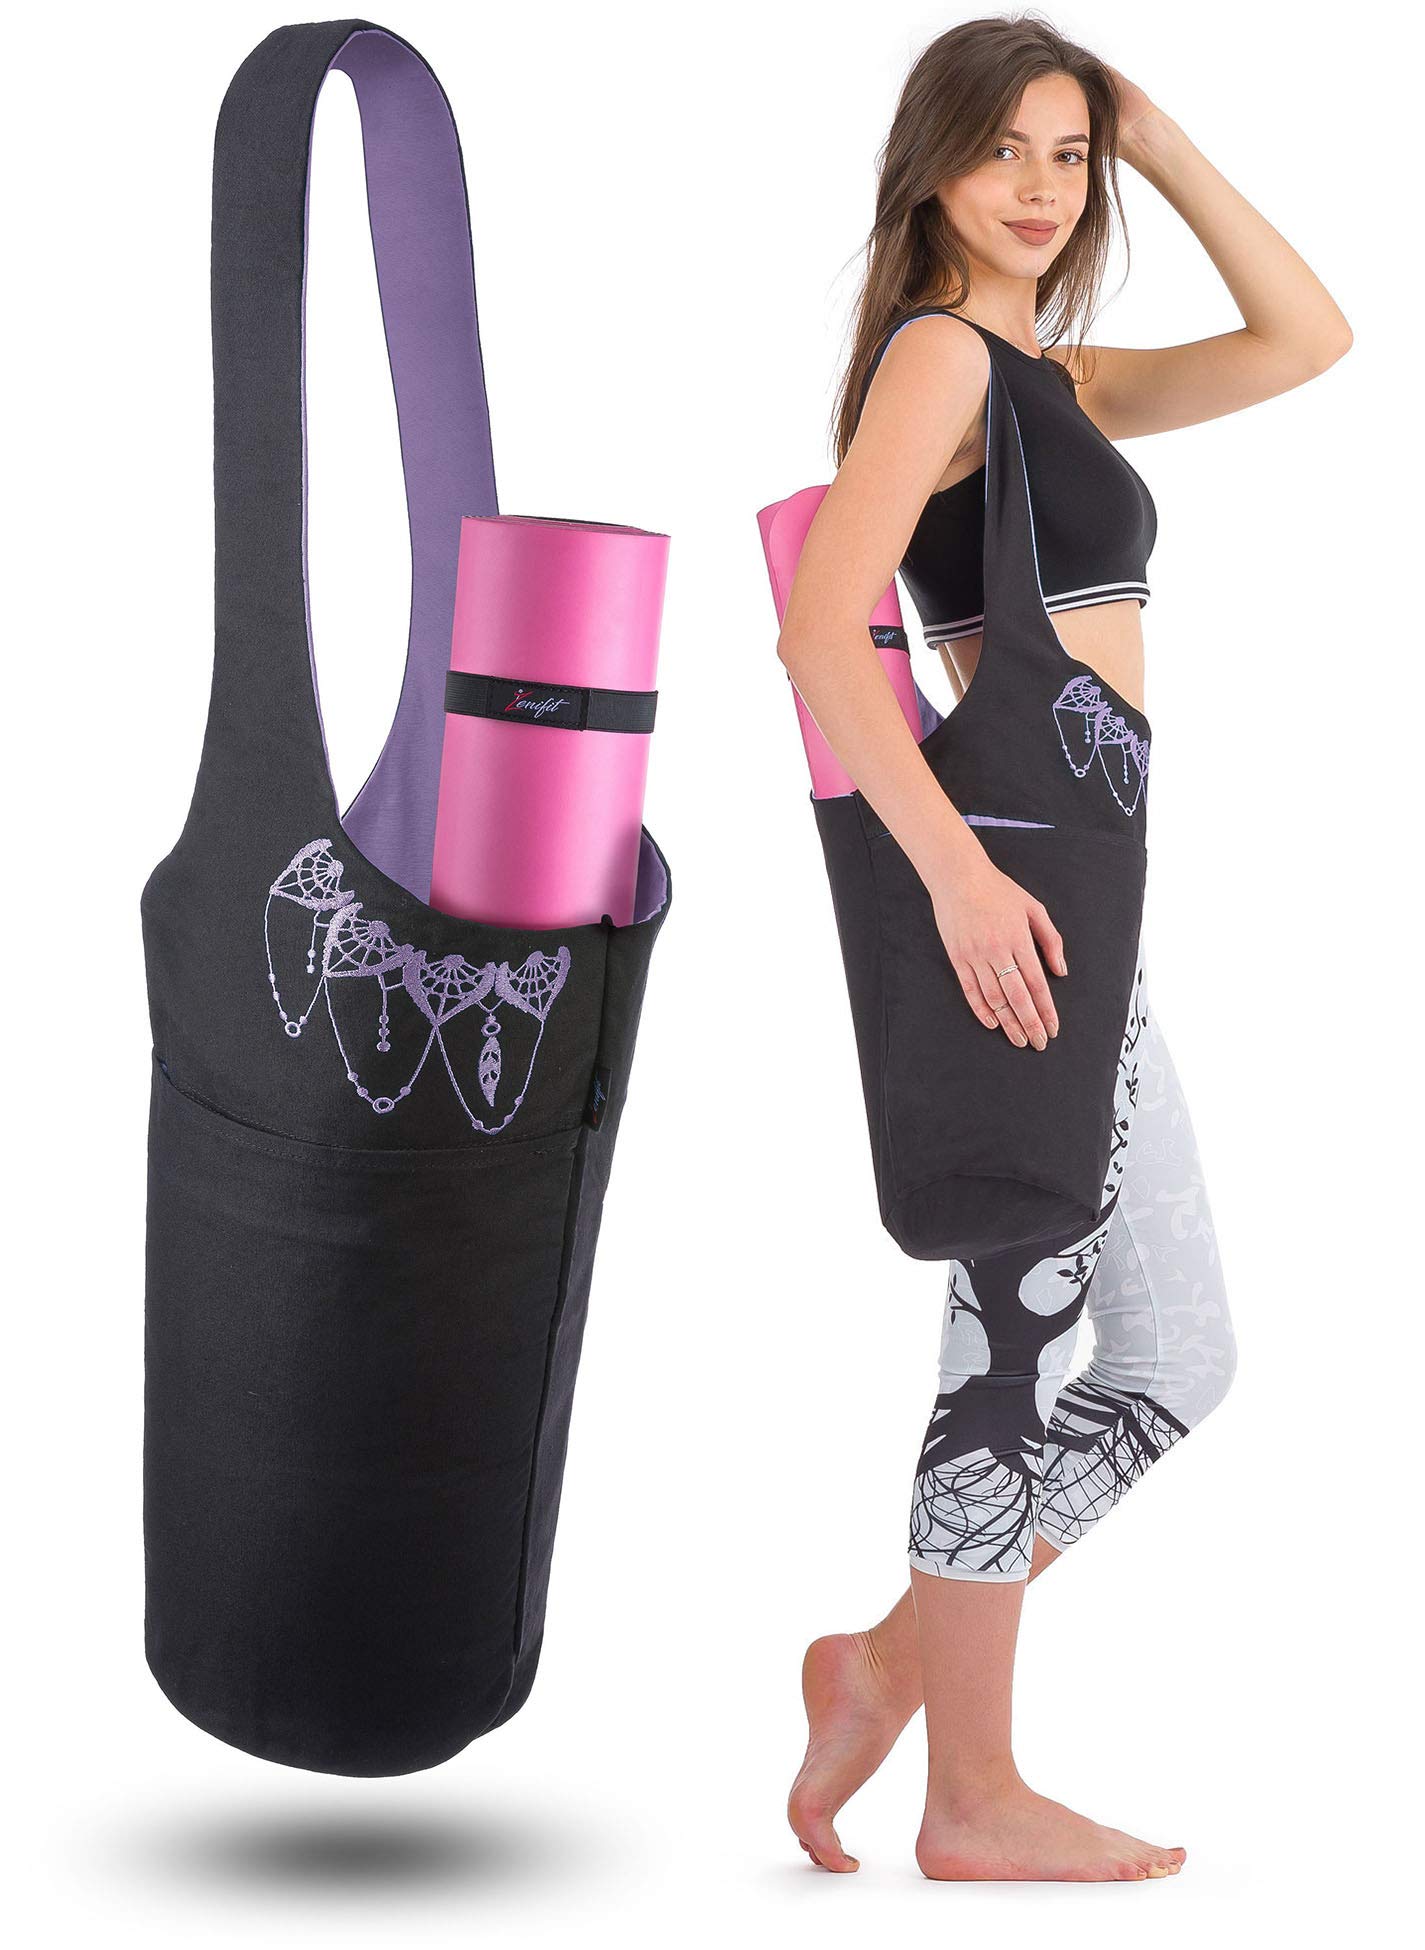 Zenifit Yoga Mat Bag - Long Tote with Pockets - Holds More Yoga  Accessories. Cute Yoga Mat Holder with Bonus Yoga Mat Strap Elastics.  Stylish and Practical Yoga Mat Bags and Carriers